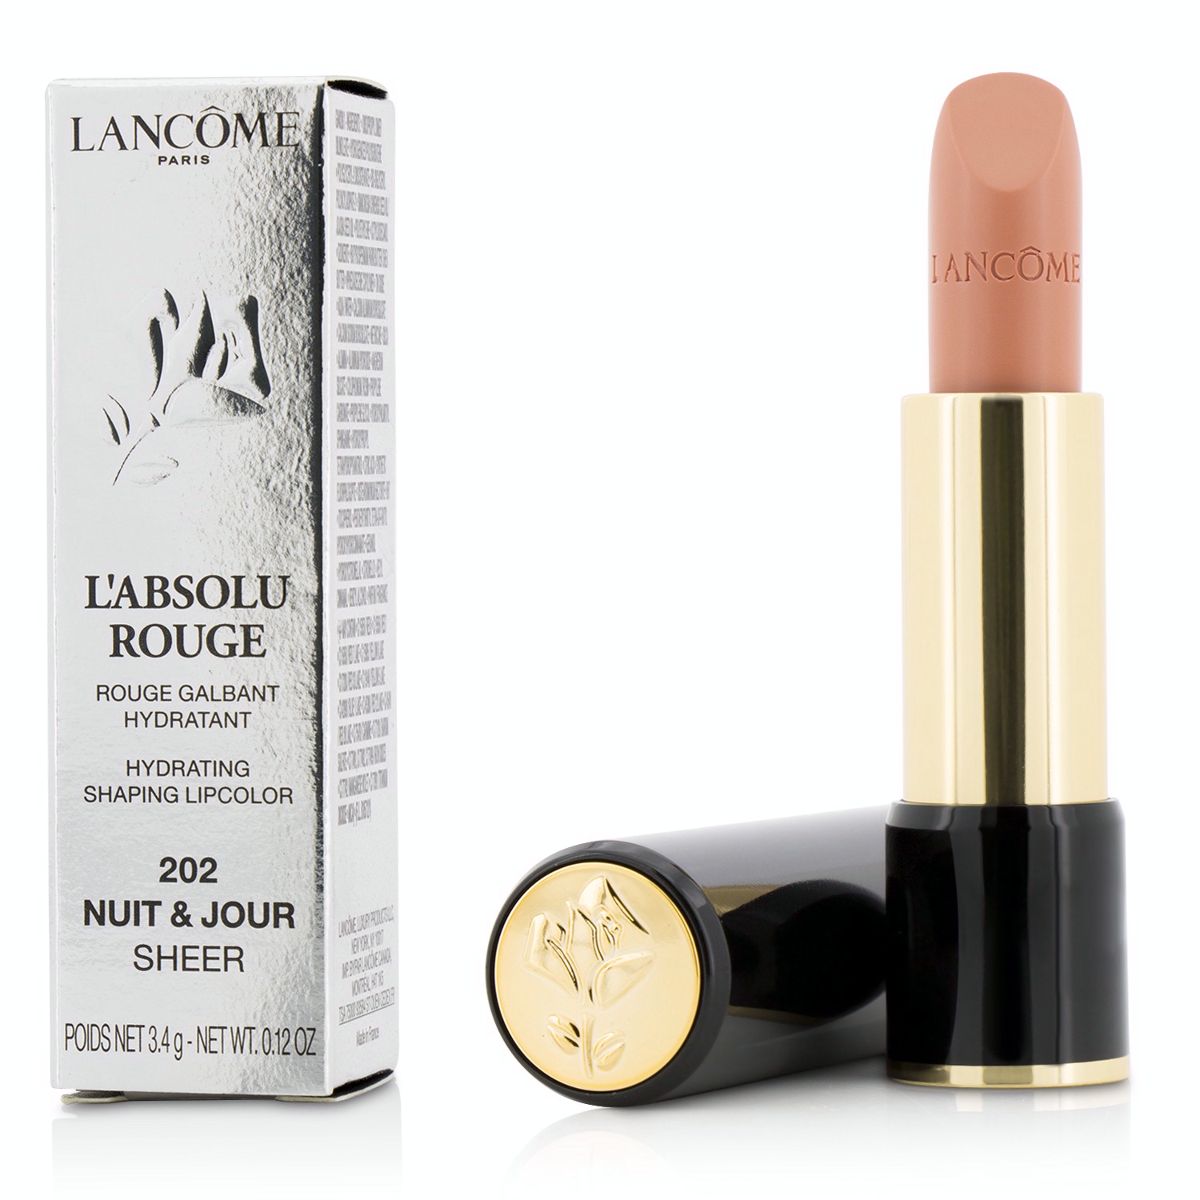 L Absolu Rouge Hydrating Shaping Lipcolor - # 202 Nuit  Jour (Sheer) Lancome Image